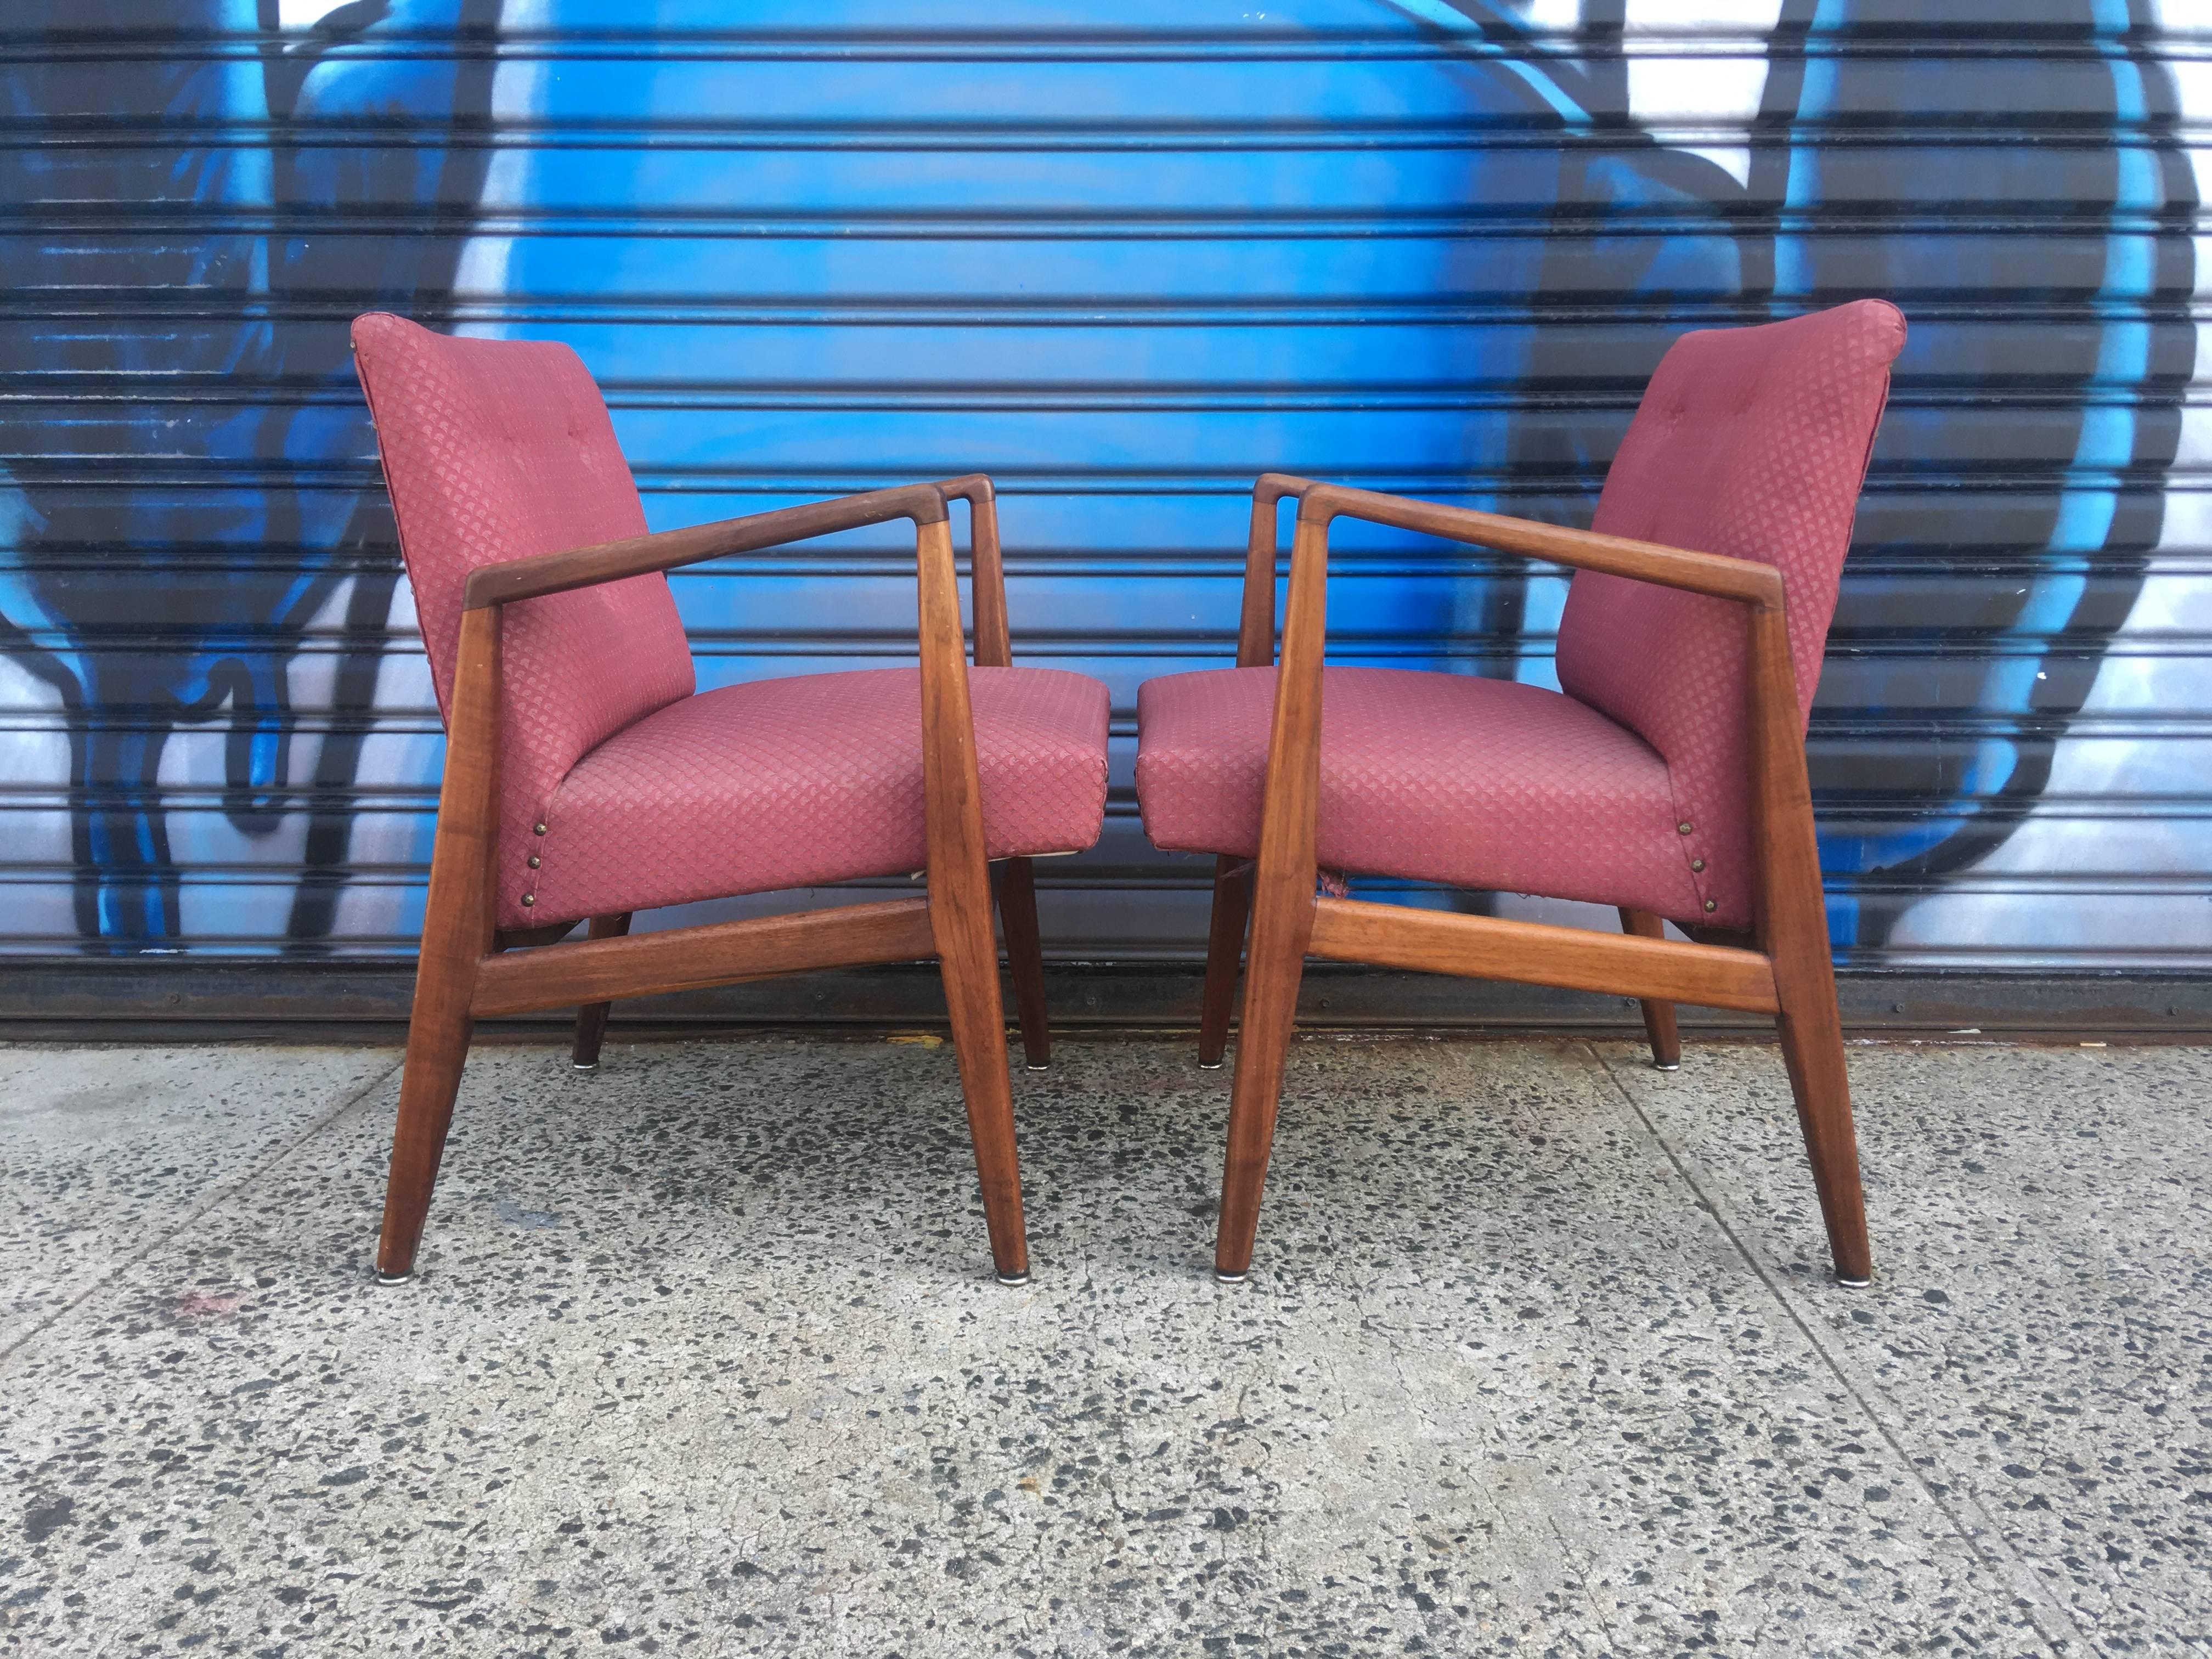 Two Jens Risom sculptural walnut armchairs. Textile in good condition. Wonderful wood color and grain. Structurally sturdy and easy to use.